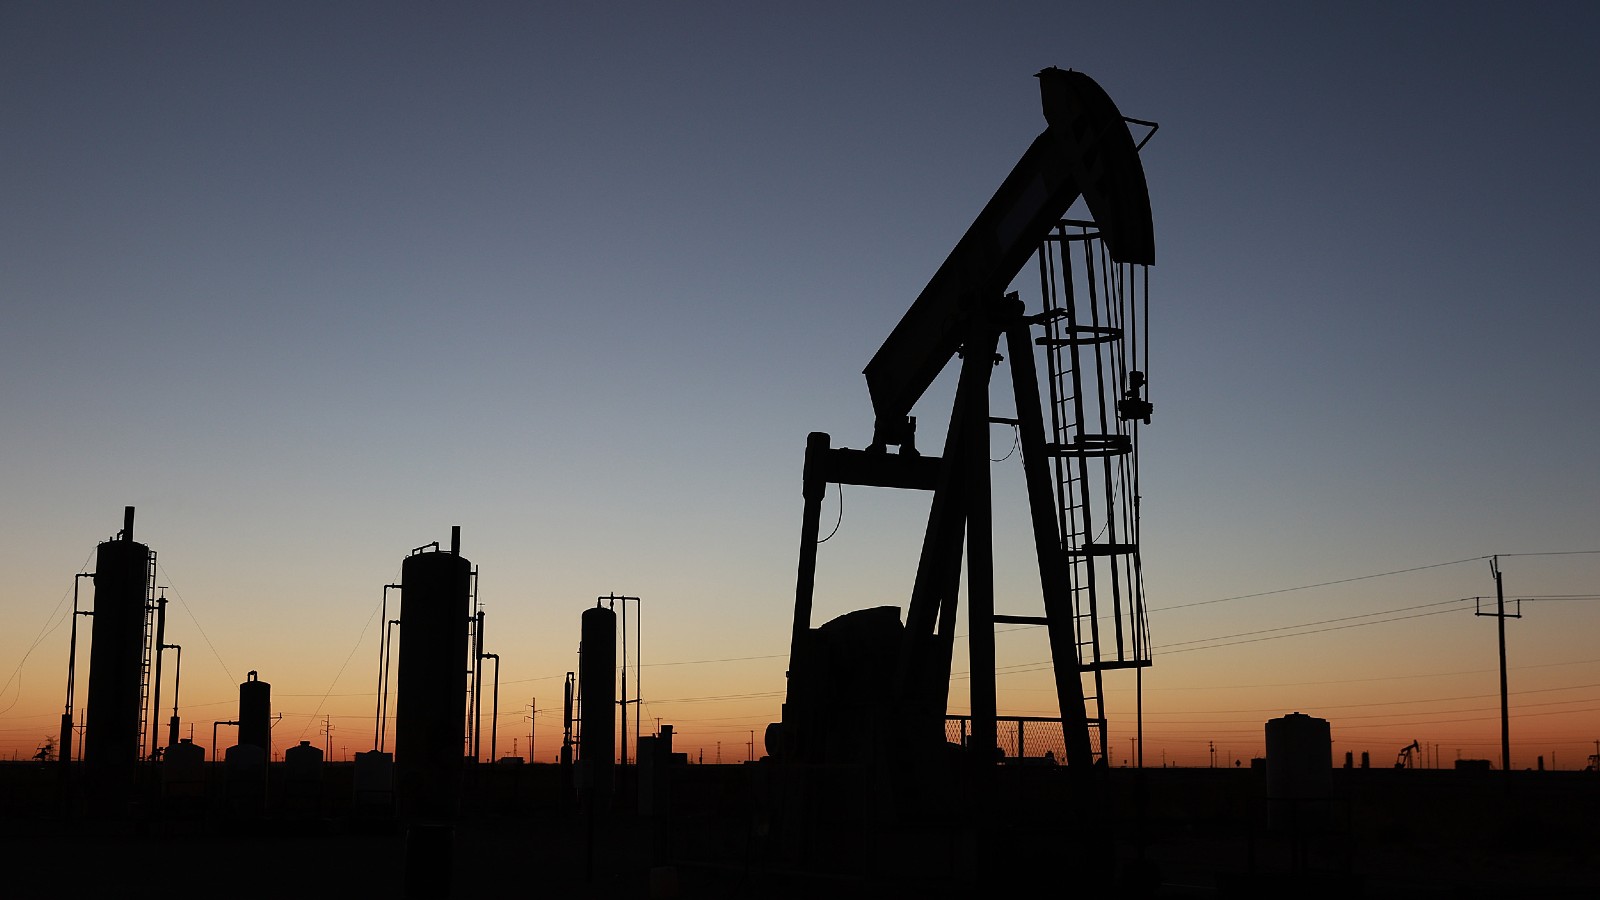 An oil pumpjack and industrial towers are silhouetted against a setting sun.